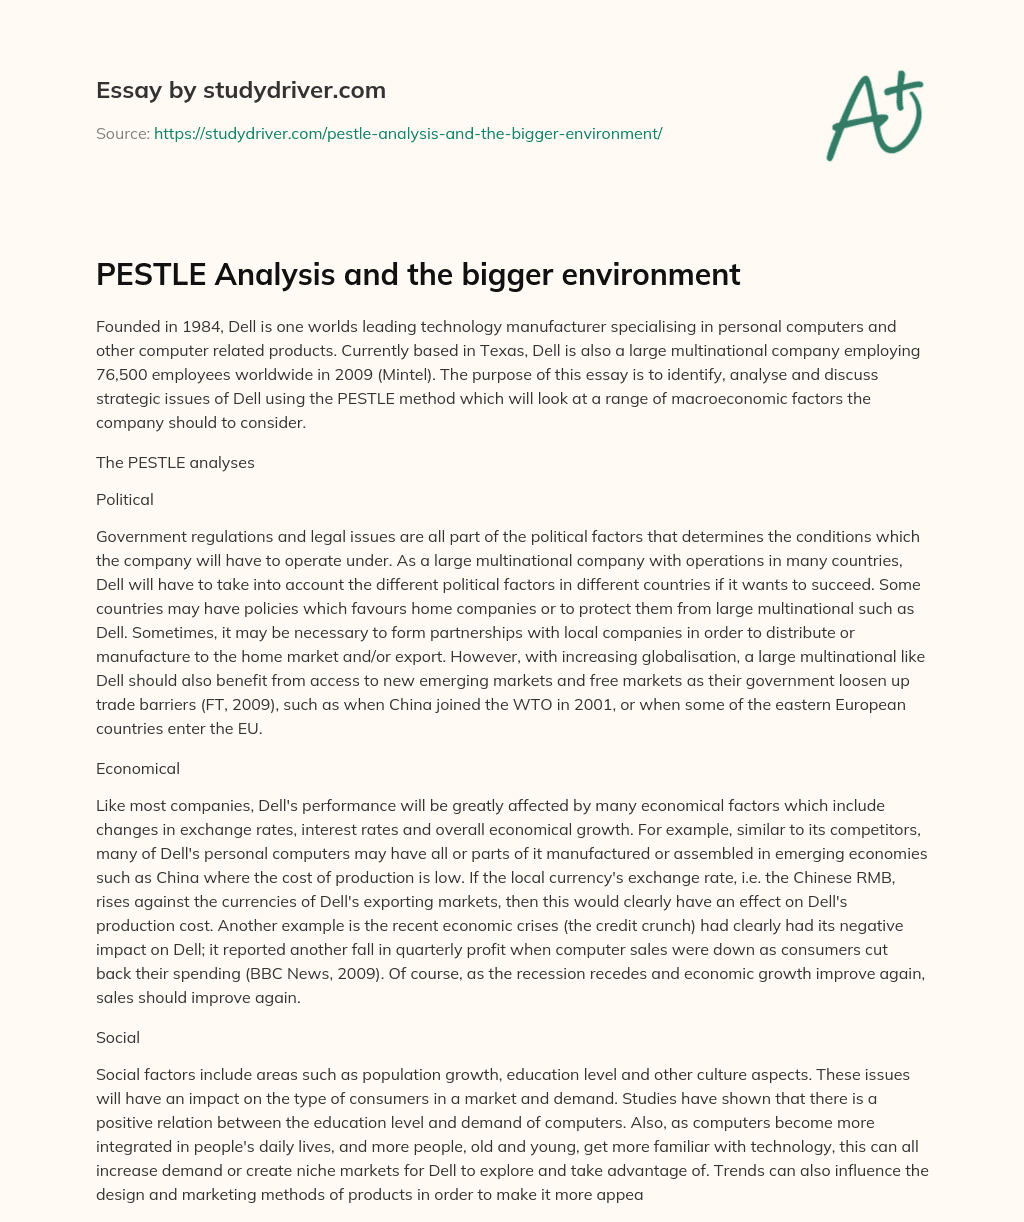 PESTLE Analysis and the Bigger Environment essay